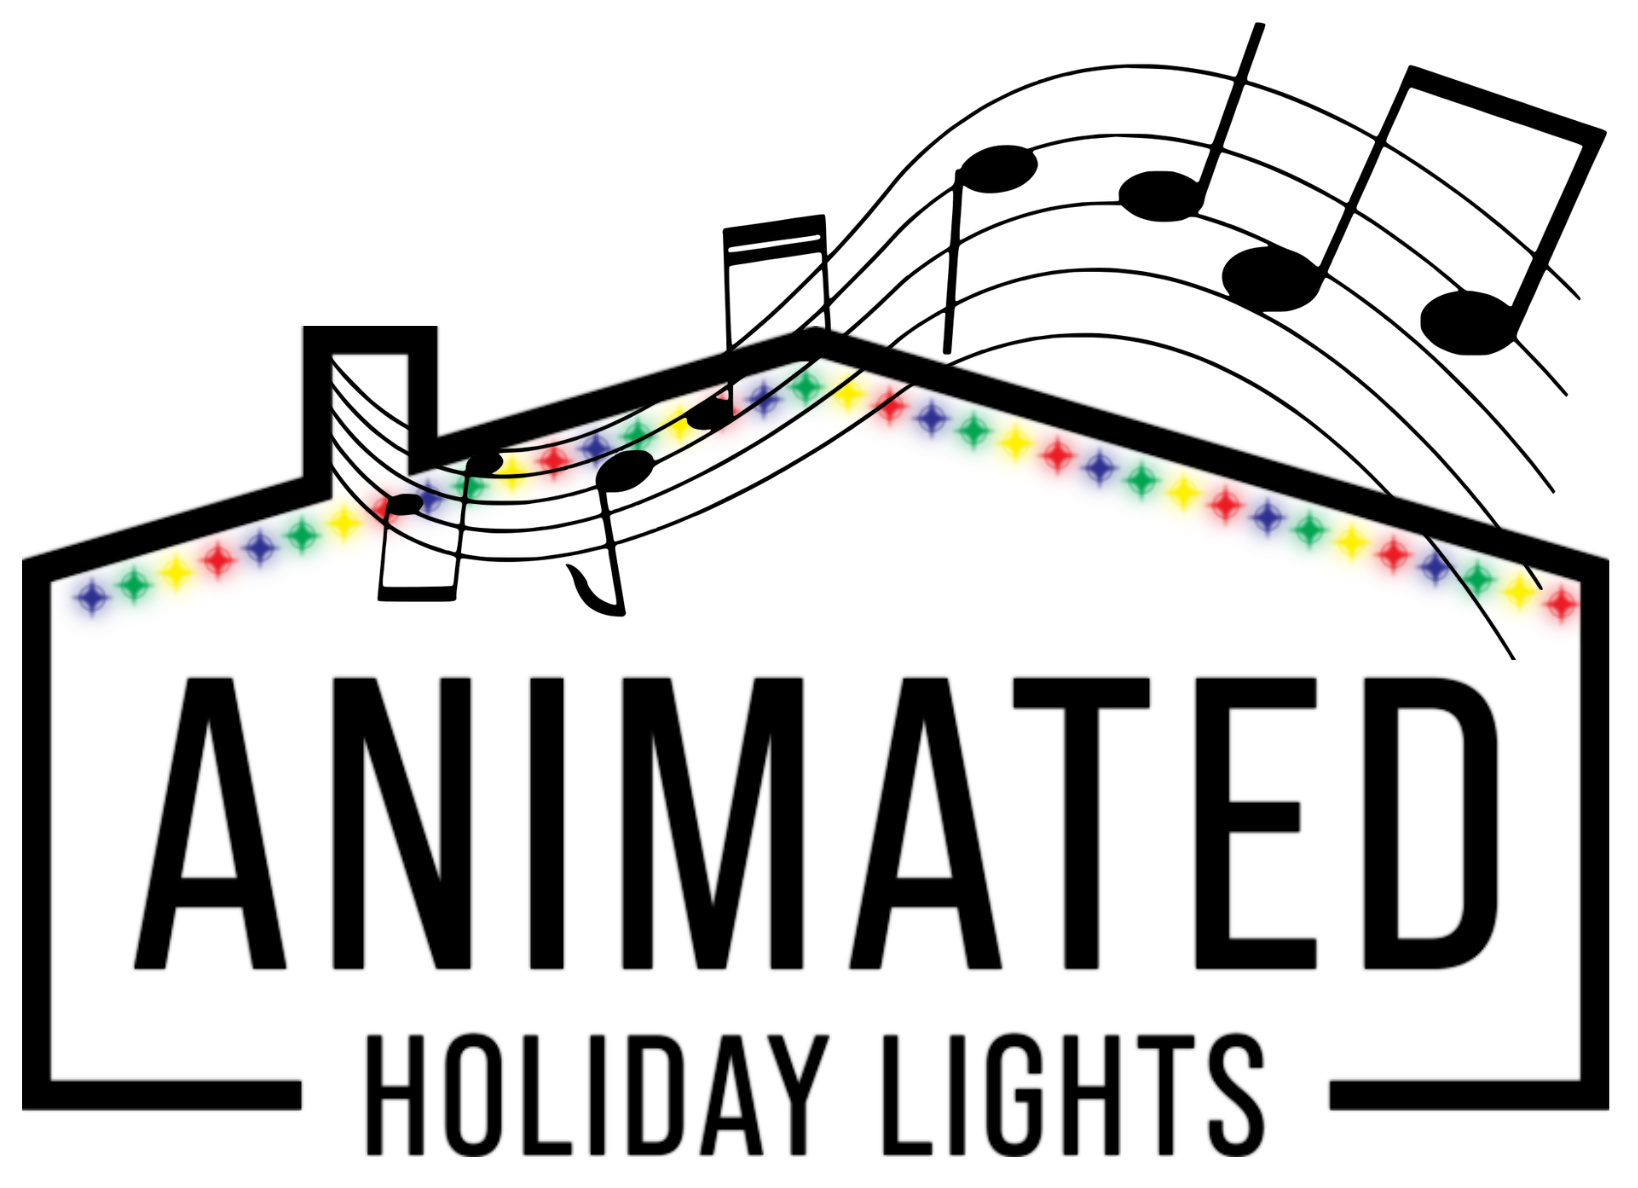 The logo for animated holiday lights shows a house with music notes coming out of it.